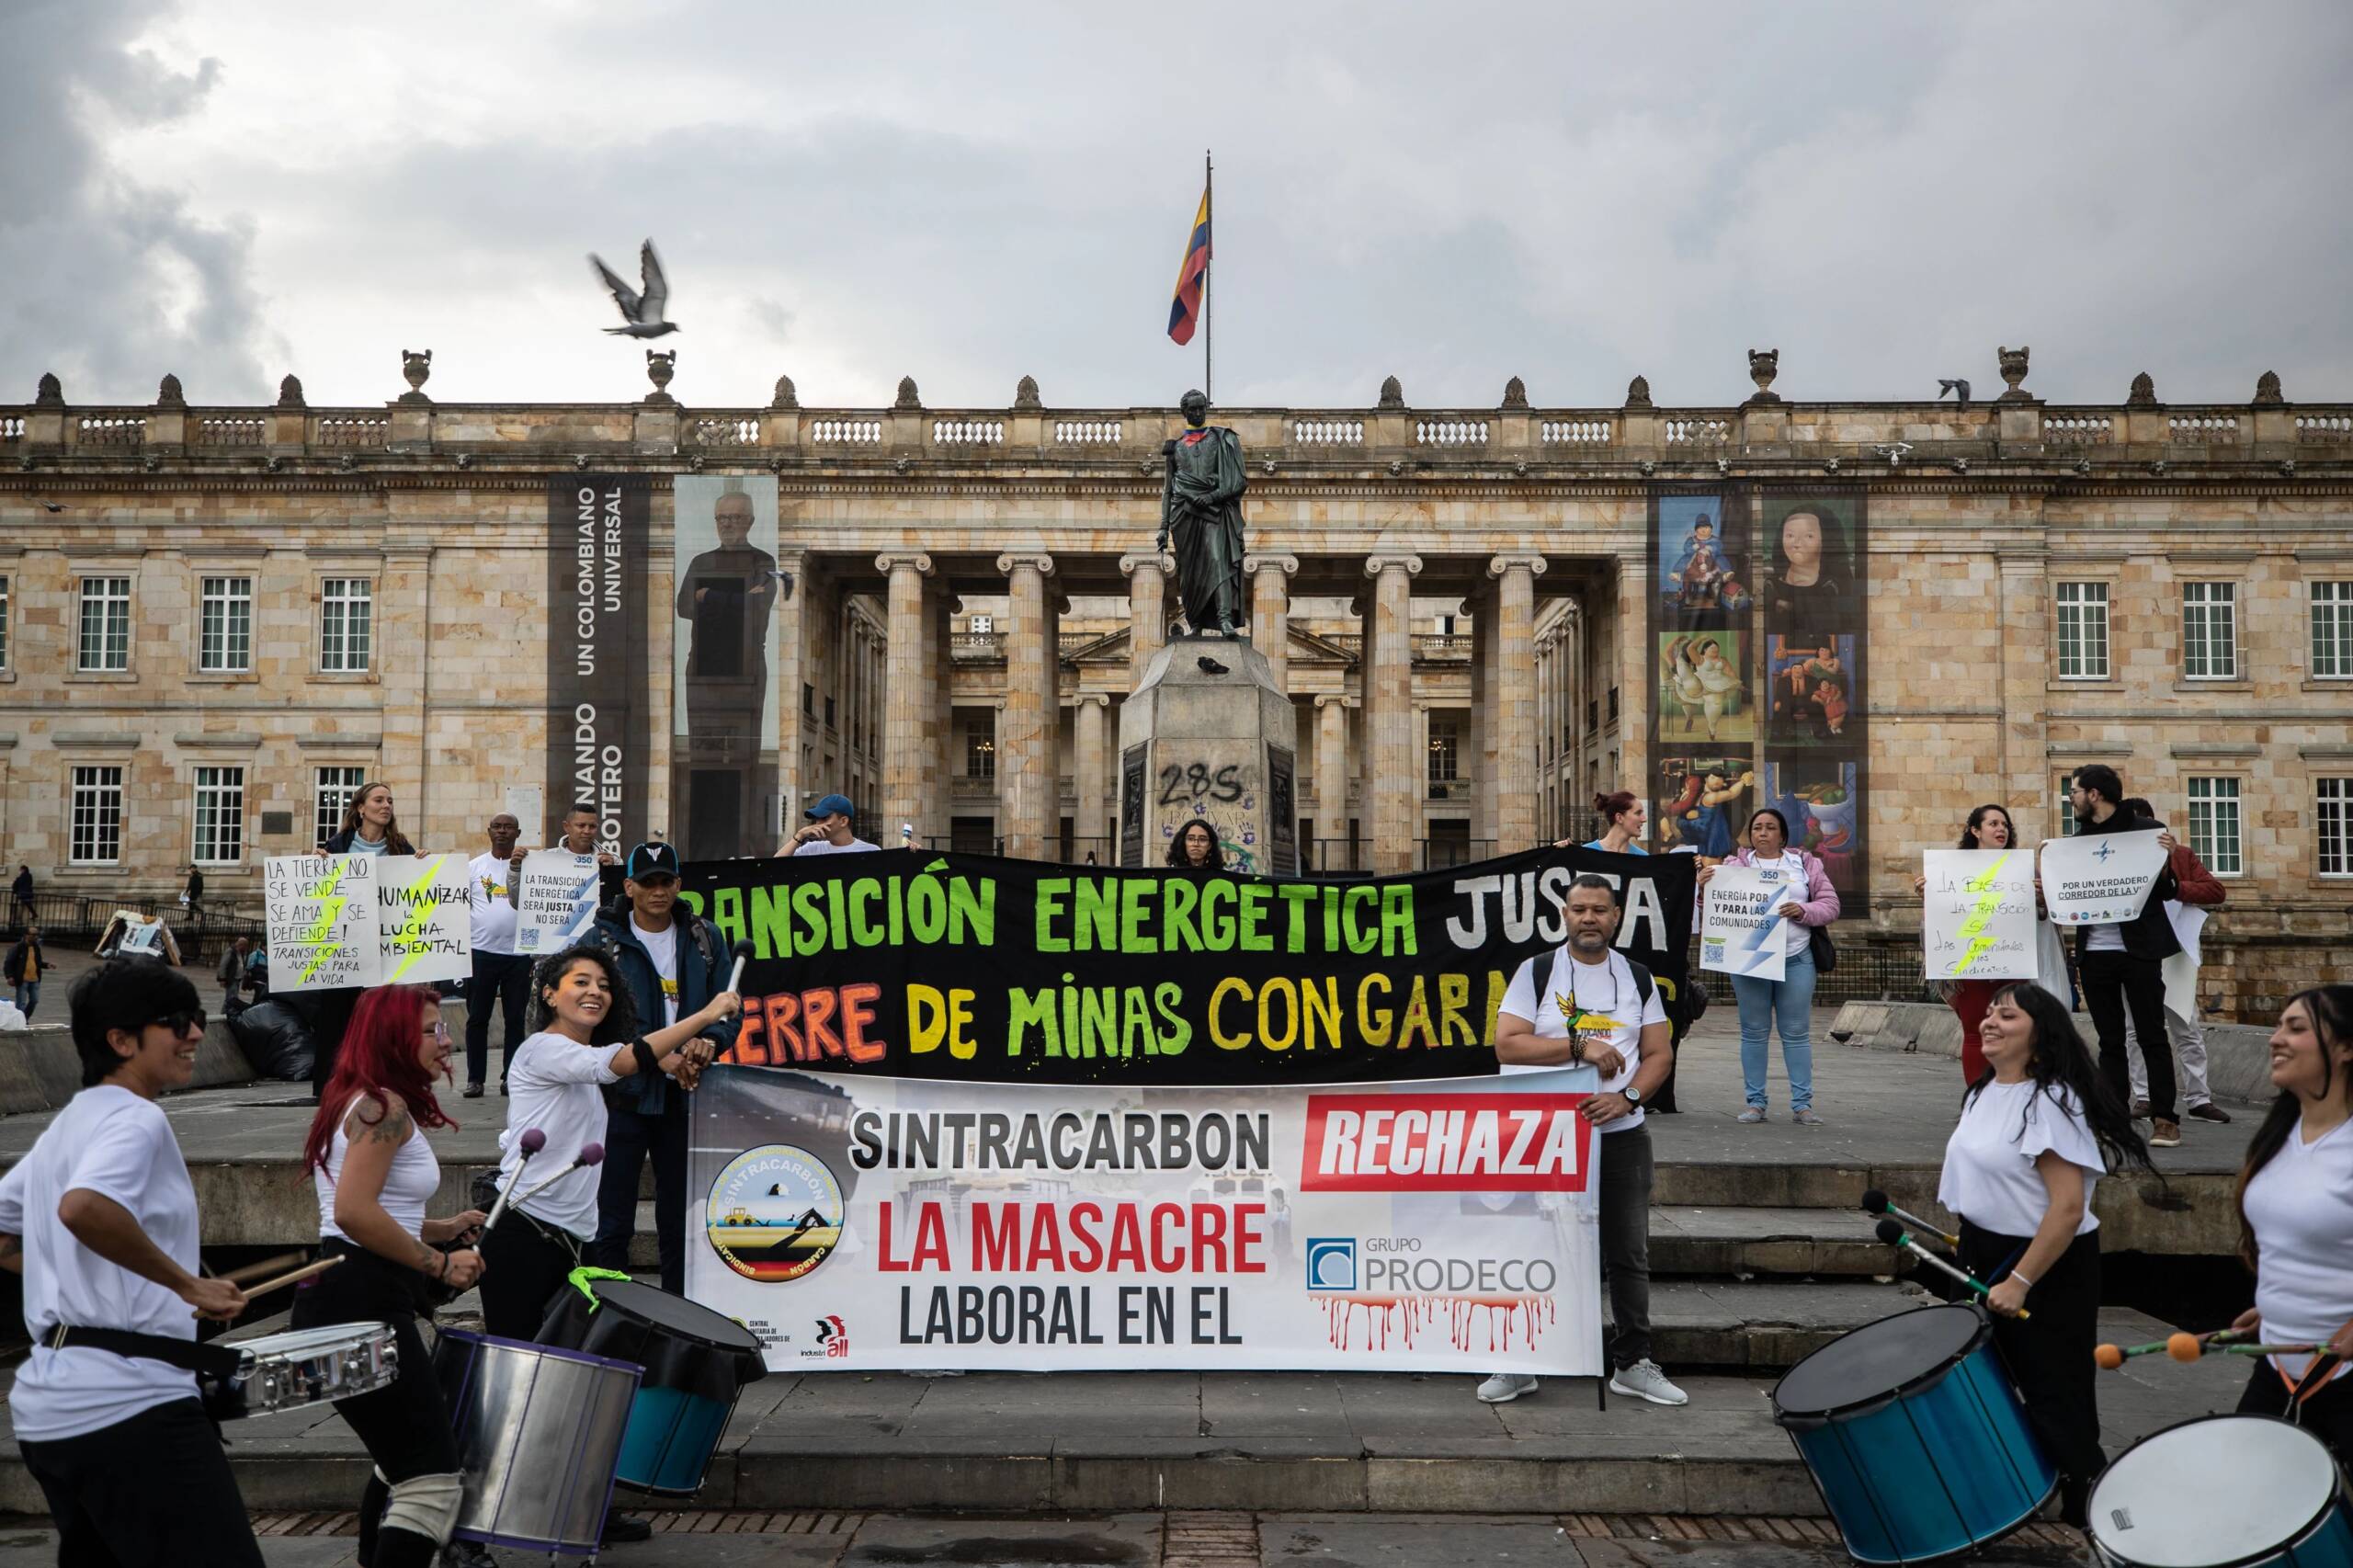 Bogotá, Colombia, November 3: communities attend public hearings and hold a protest in Plaza de Bolivar to call for the closure of Glencore's open-pit coal mines and for a just energy transition for all. Photo credit: Iván Valencia